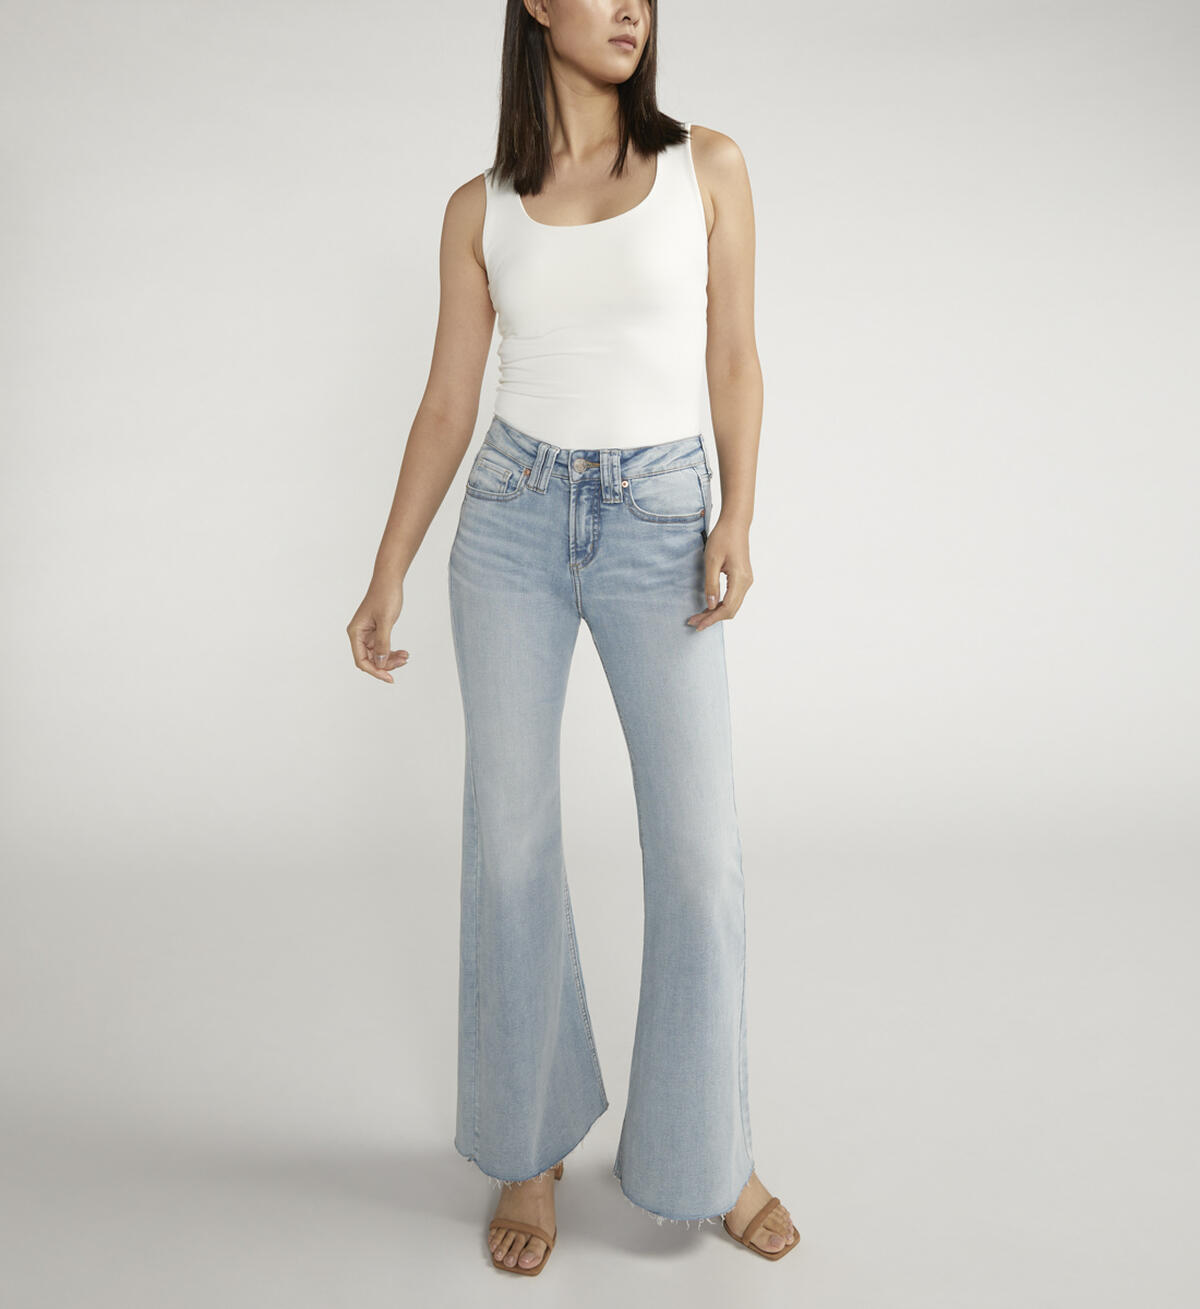 Suki Mid Rise Flare Jeans, , hi-res image number 0